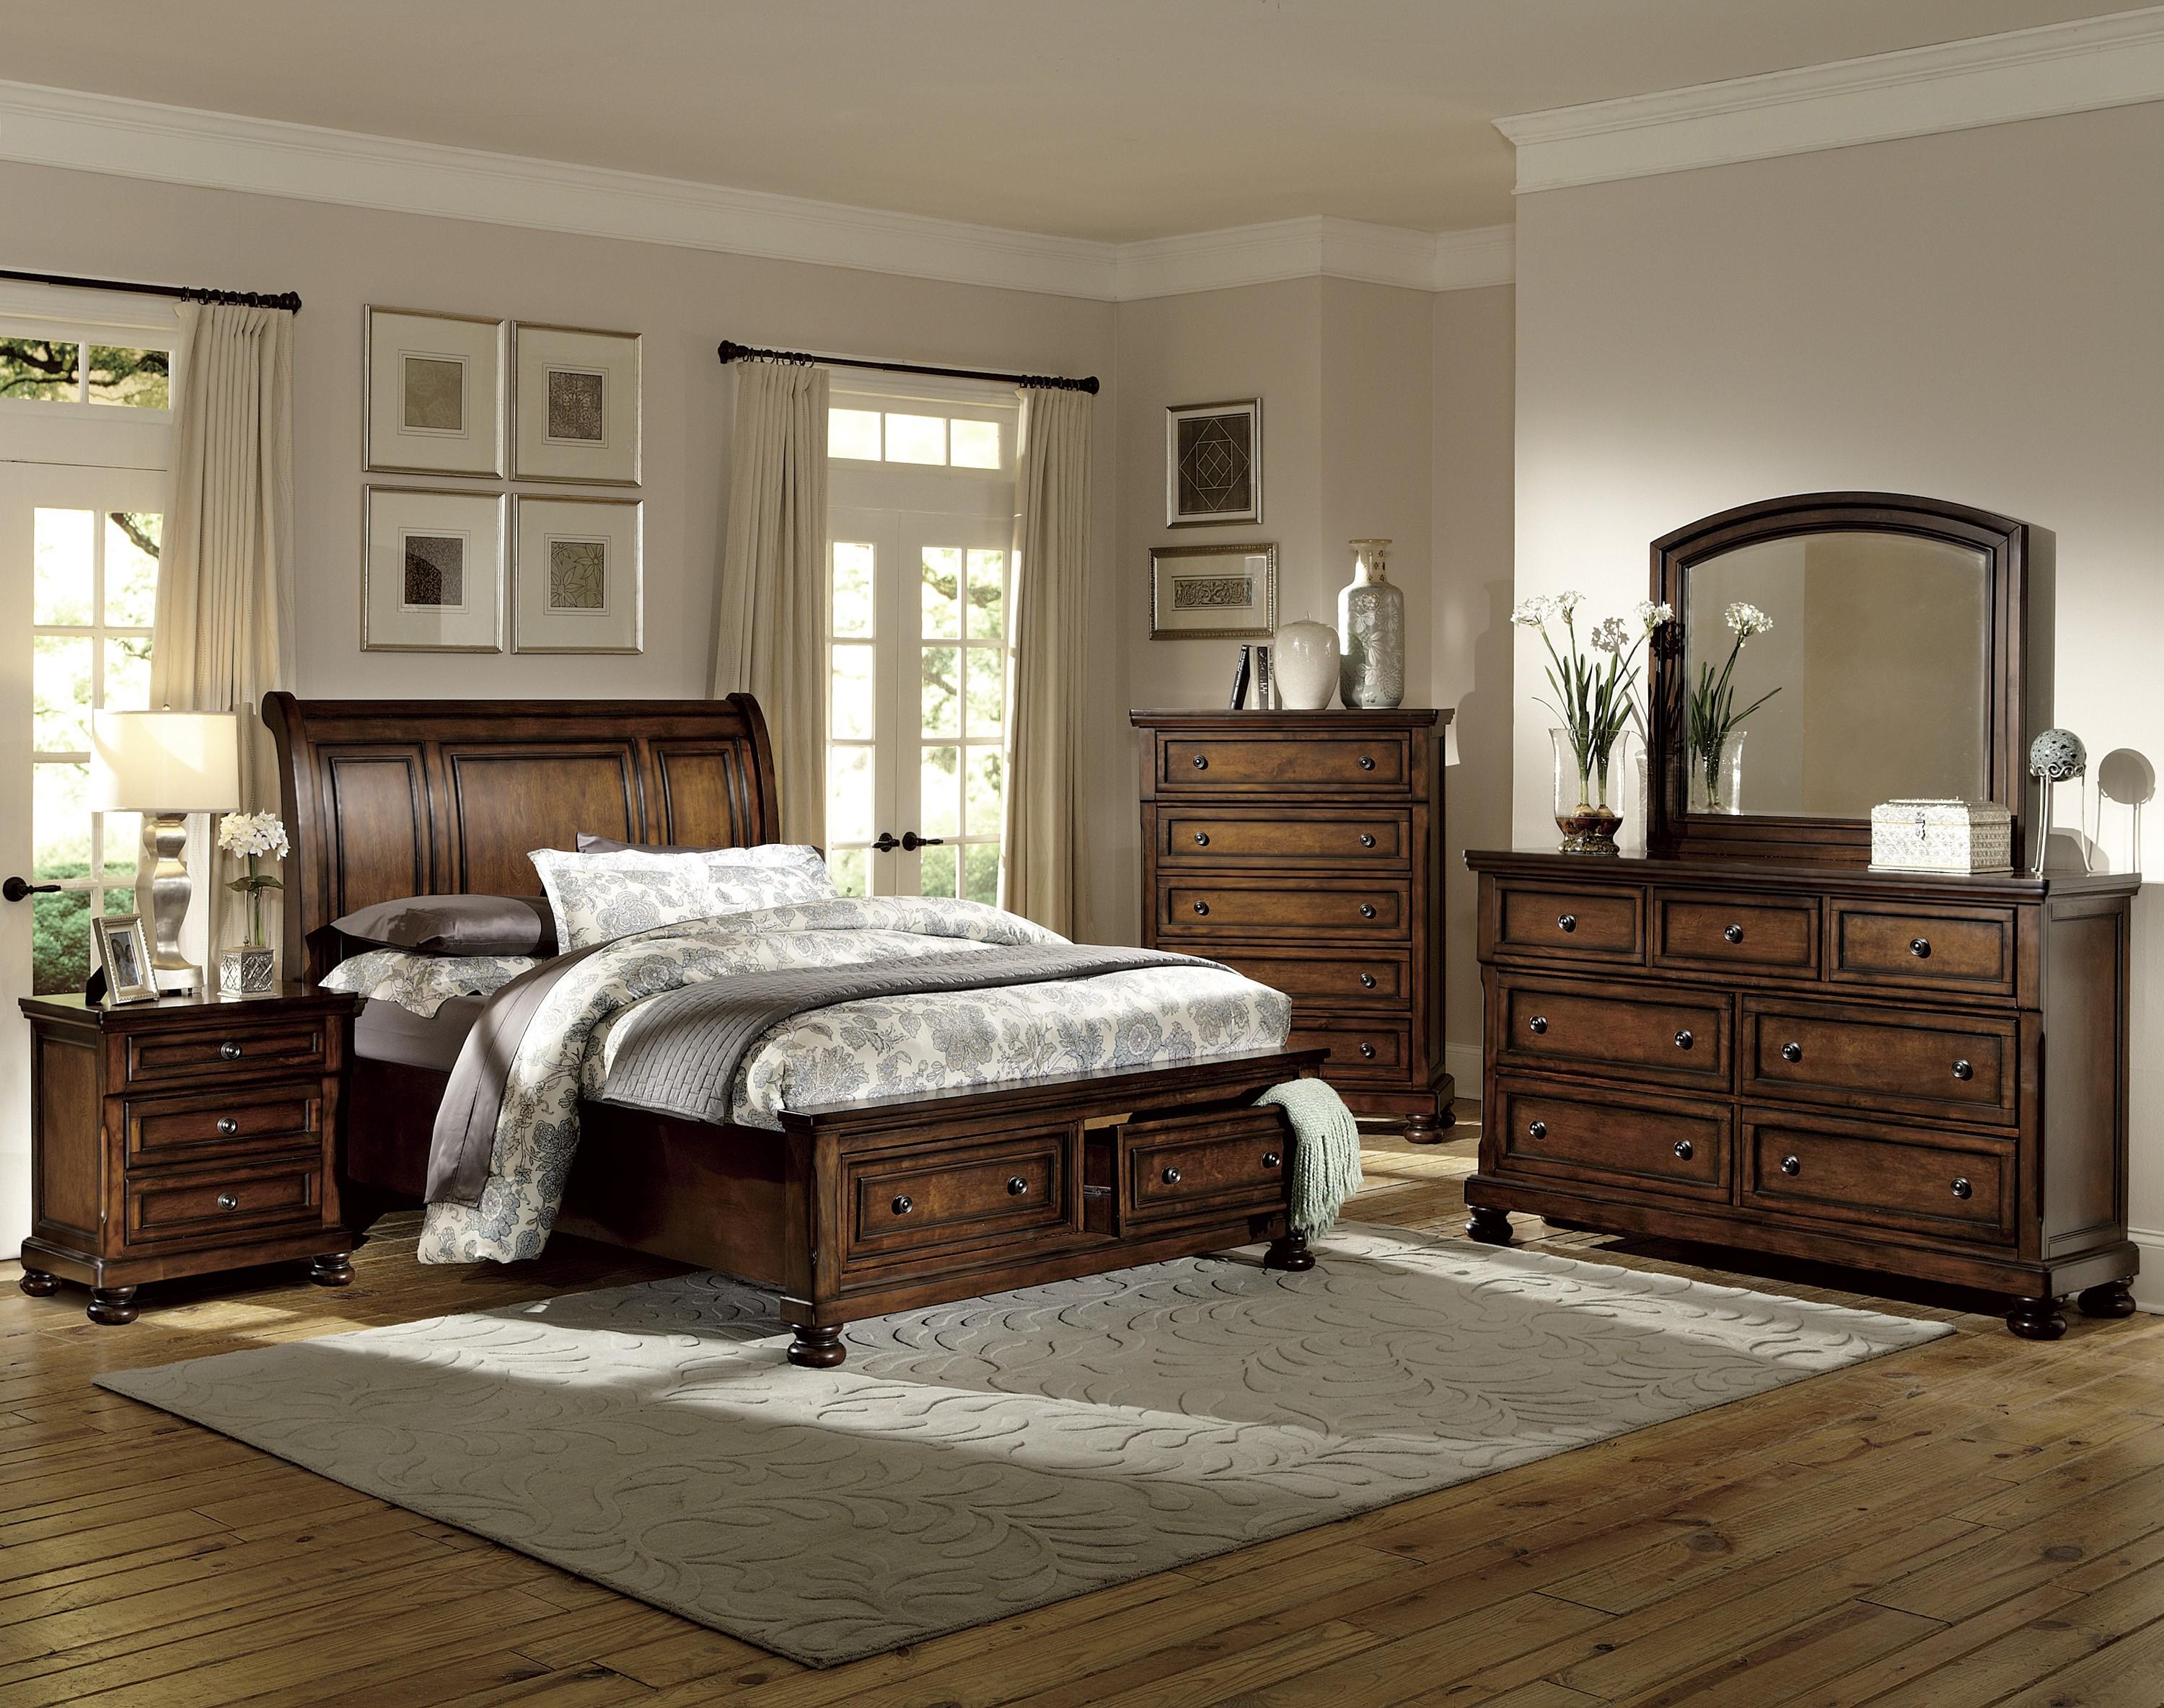 Traditional Bedroom Set 2159-1-6PC Cumberland 2159-1-6PC in Cherry 